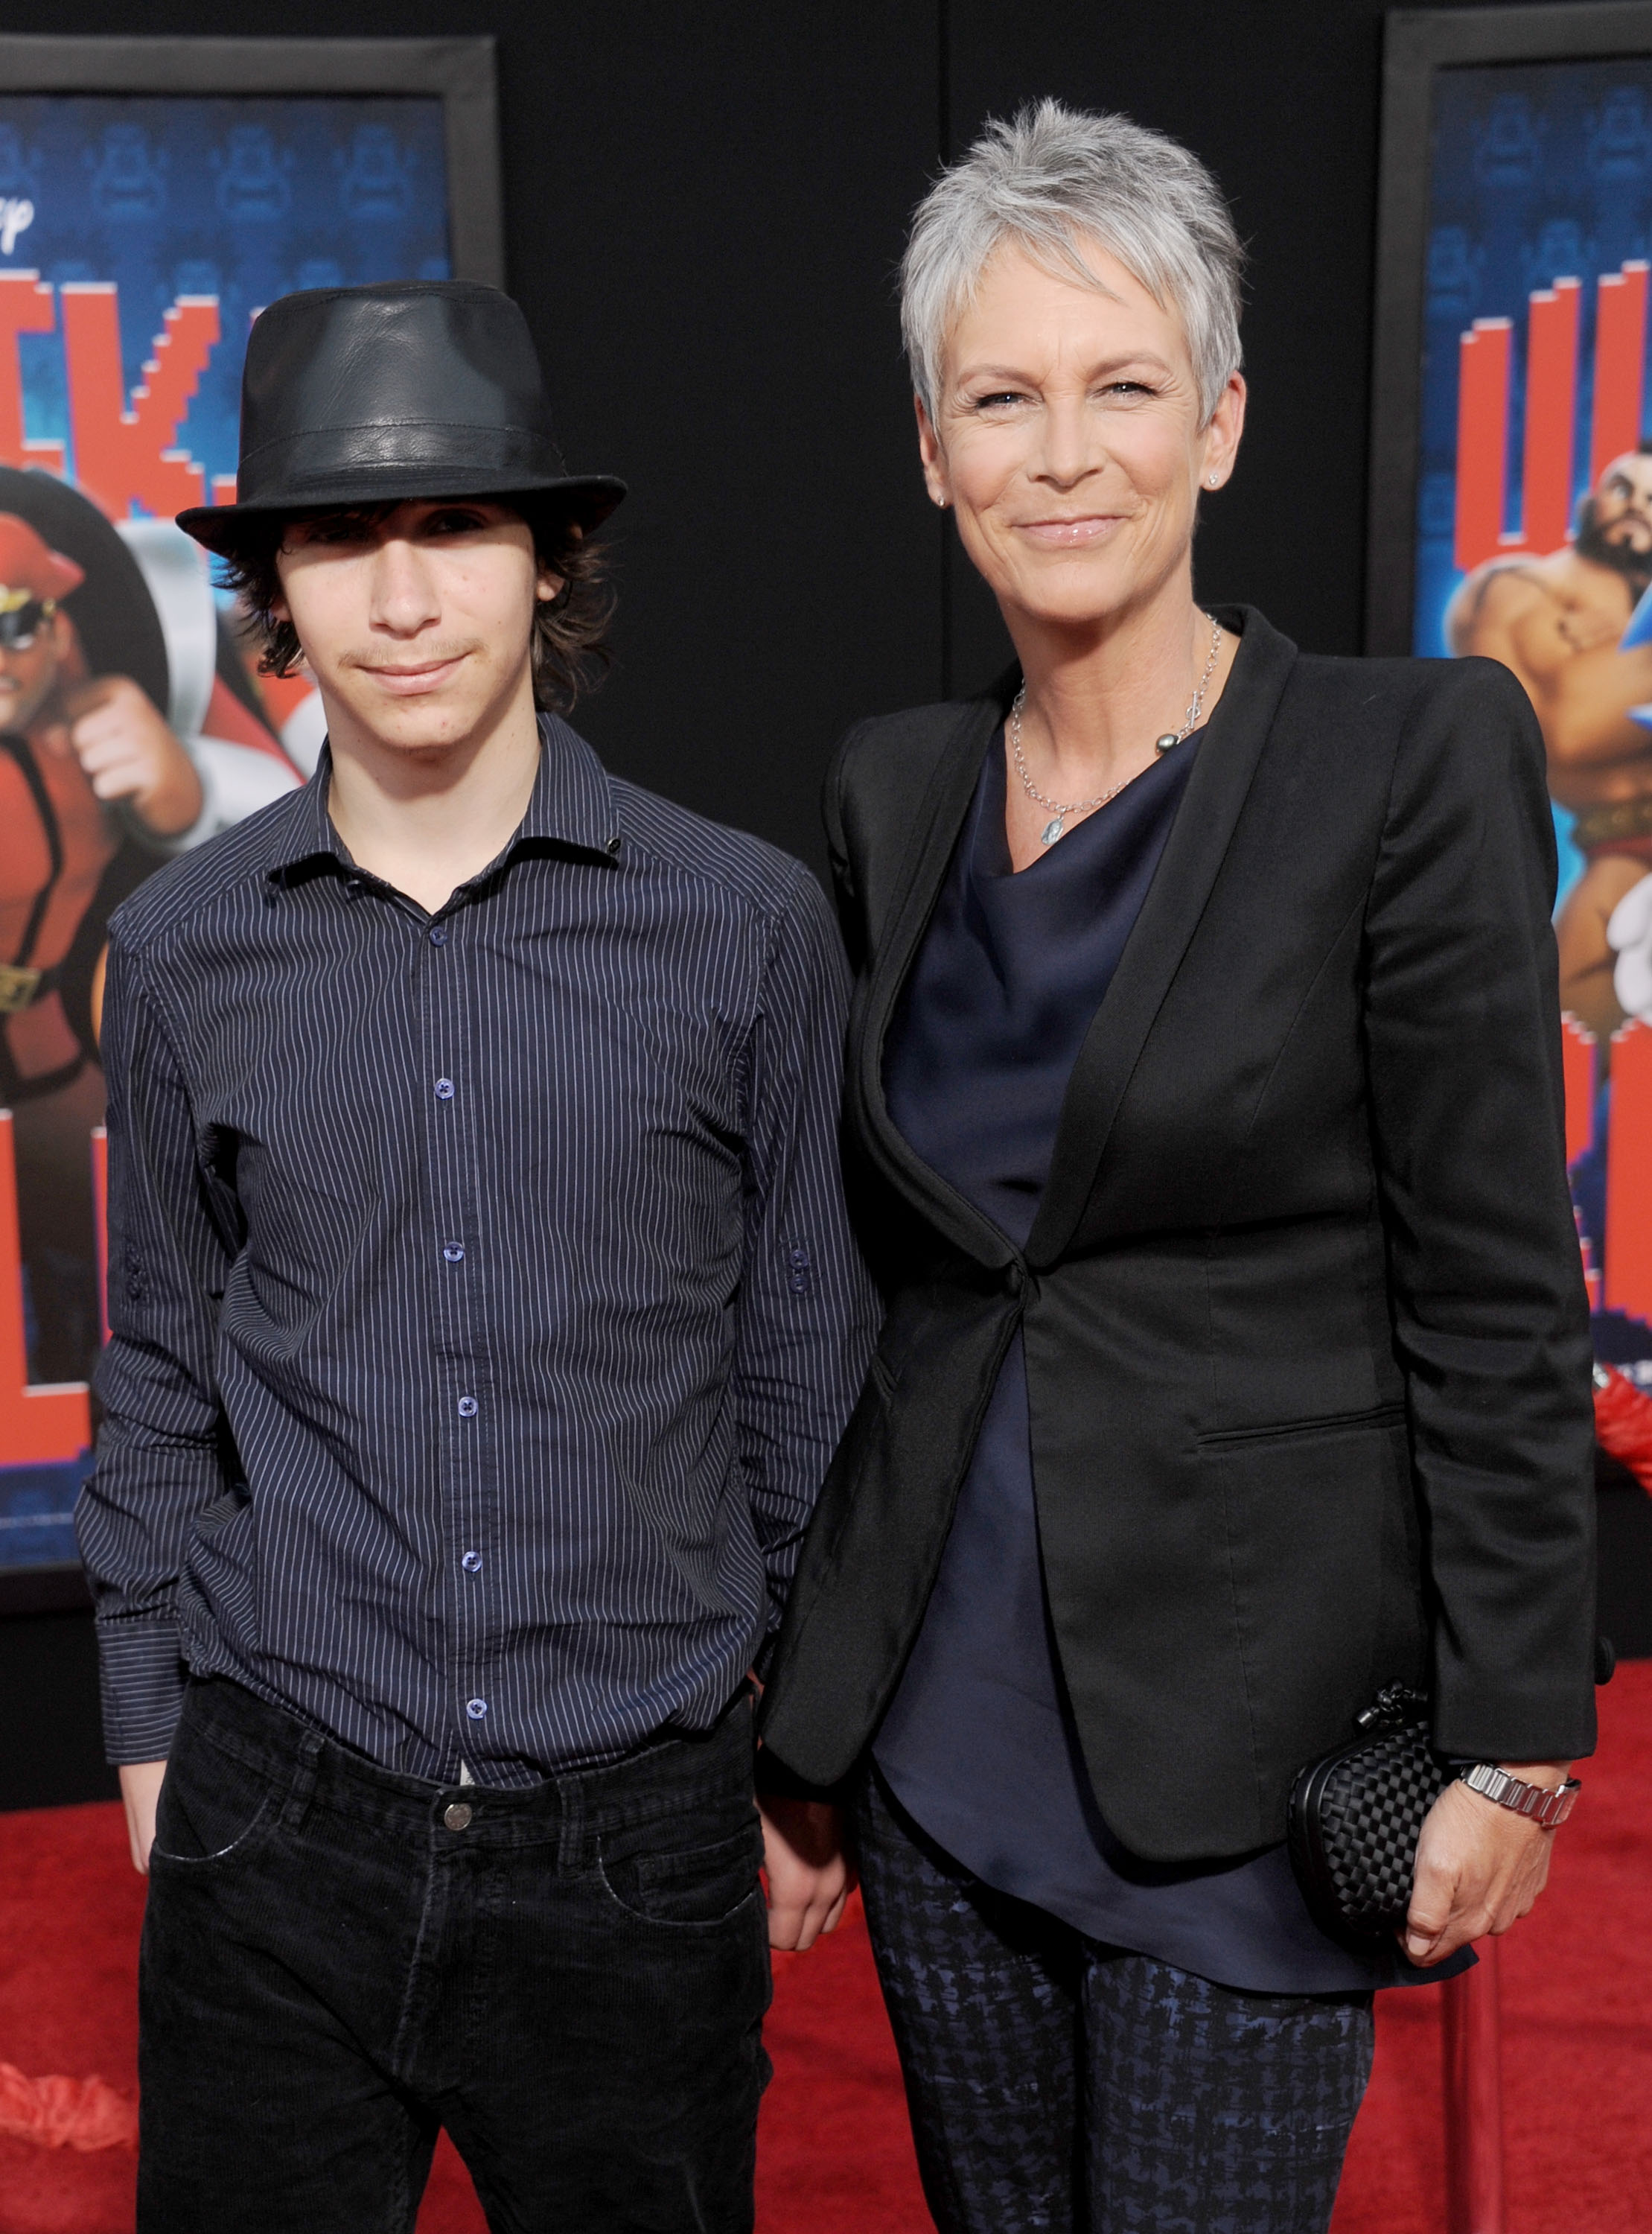 Jamie Lee Curtis and son, before he transitioned, arrive at the Los Angeles premiere of "Wreck-It Ralph" at the El Capitan Theatre on October 29, 2012, in Hollywood, California | Source: Getty Images